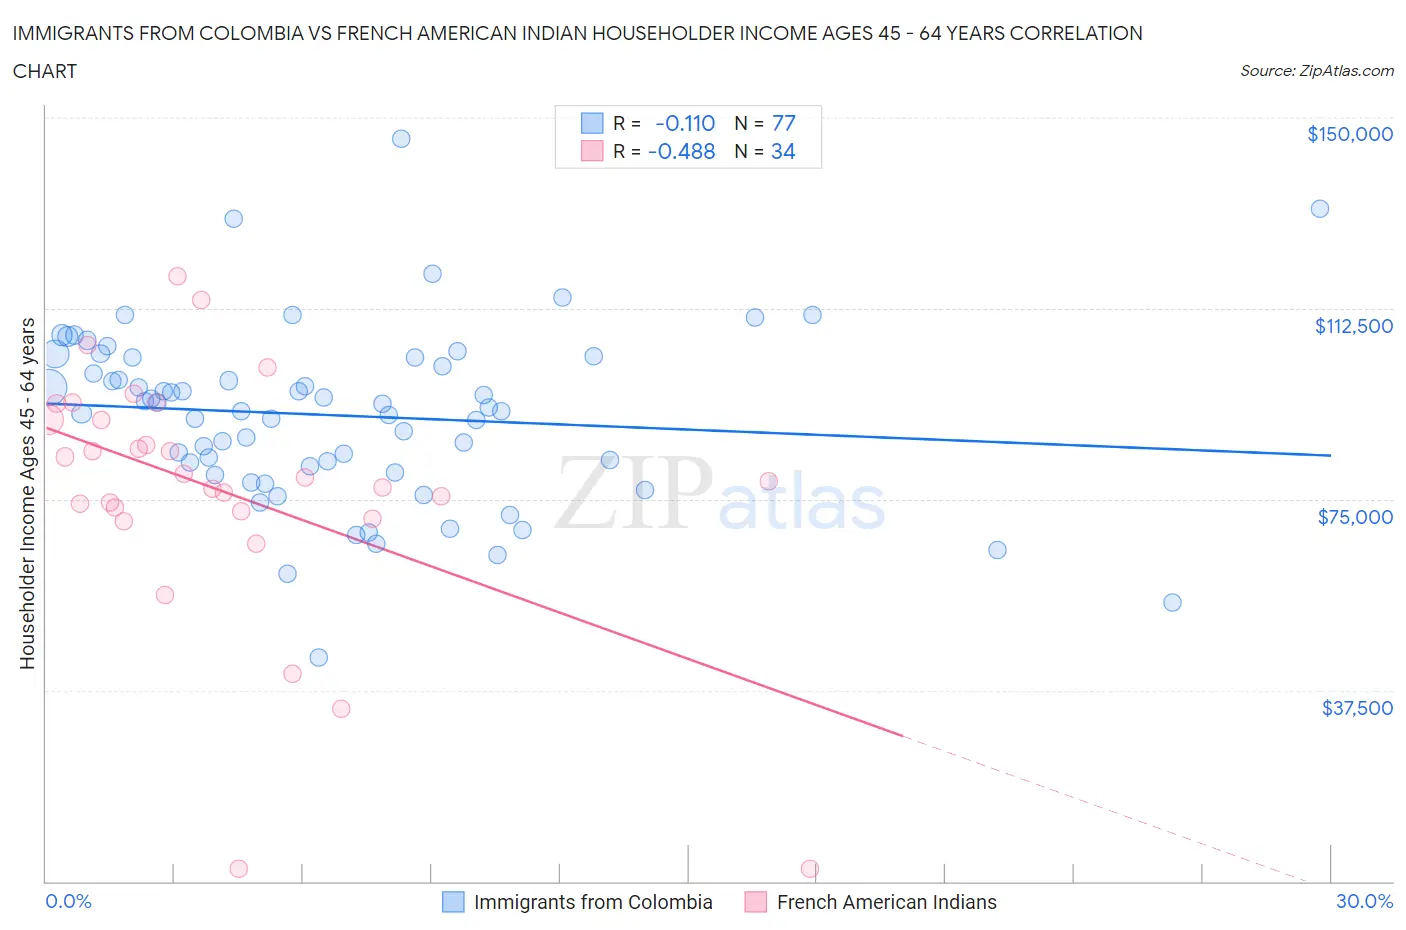 Immigrants from Colombia vs French American Indian Householder Income Ages 45 - 64 years